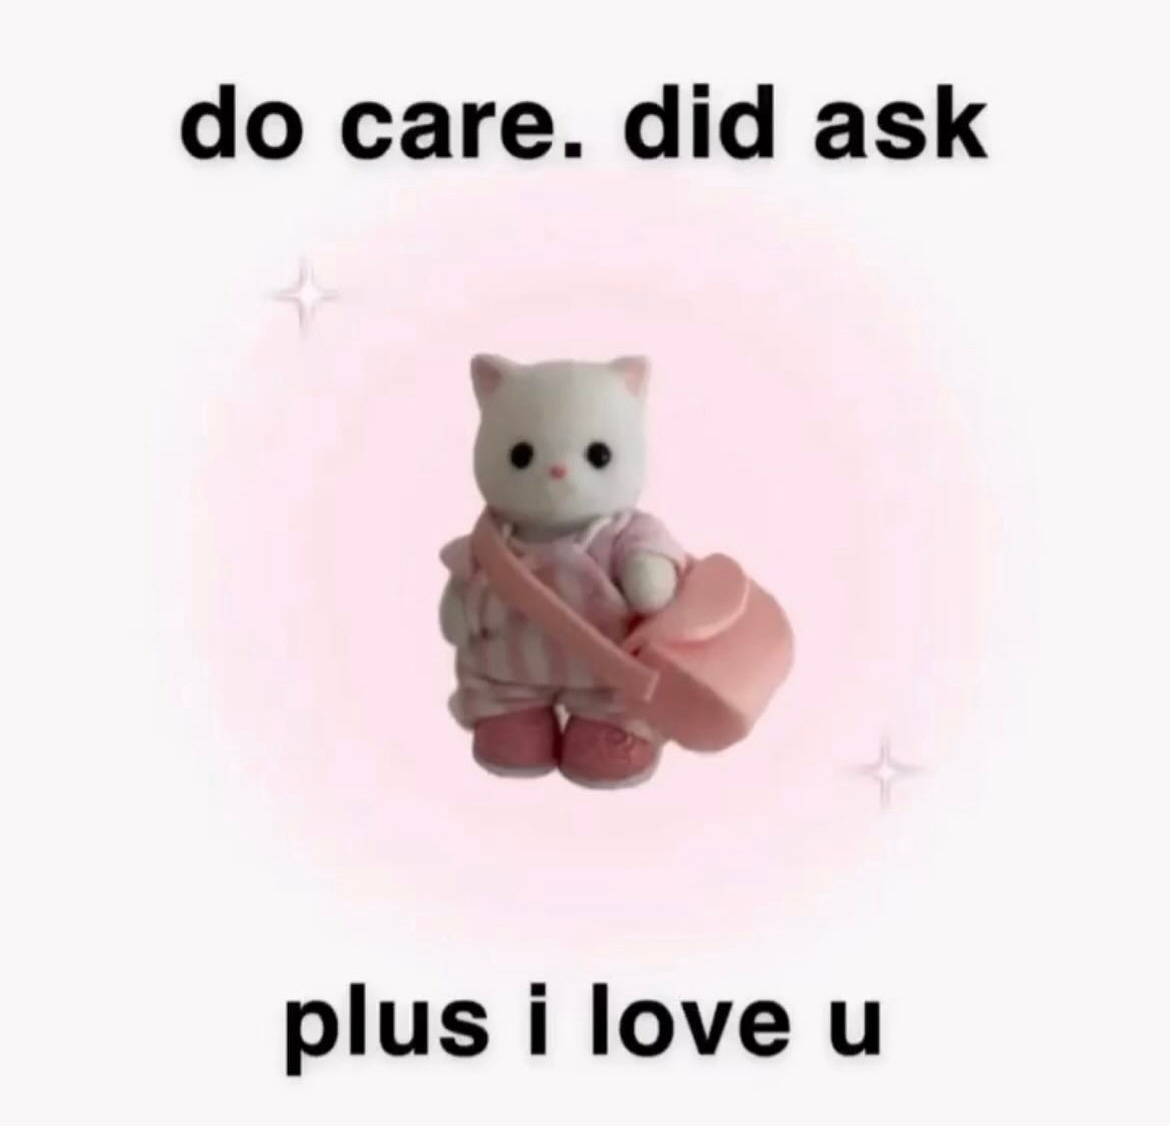 a sylvanian families white cat with a pink school bag overlaid on light pink circle. text around it says "do care. did ask. plus i love u"